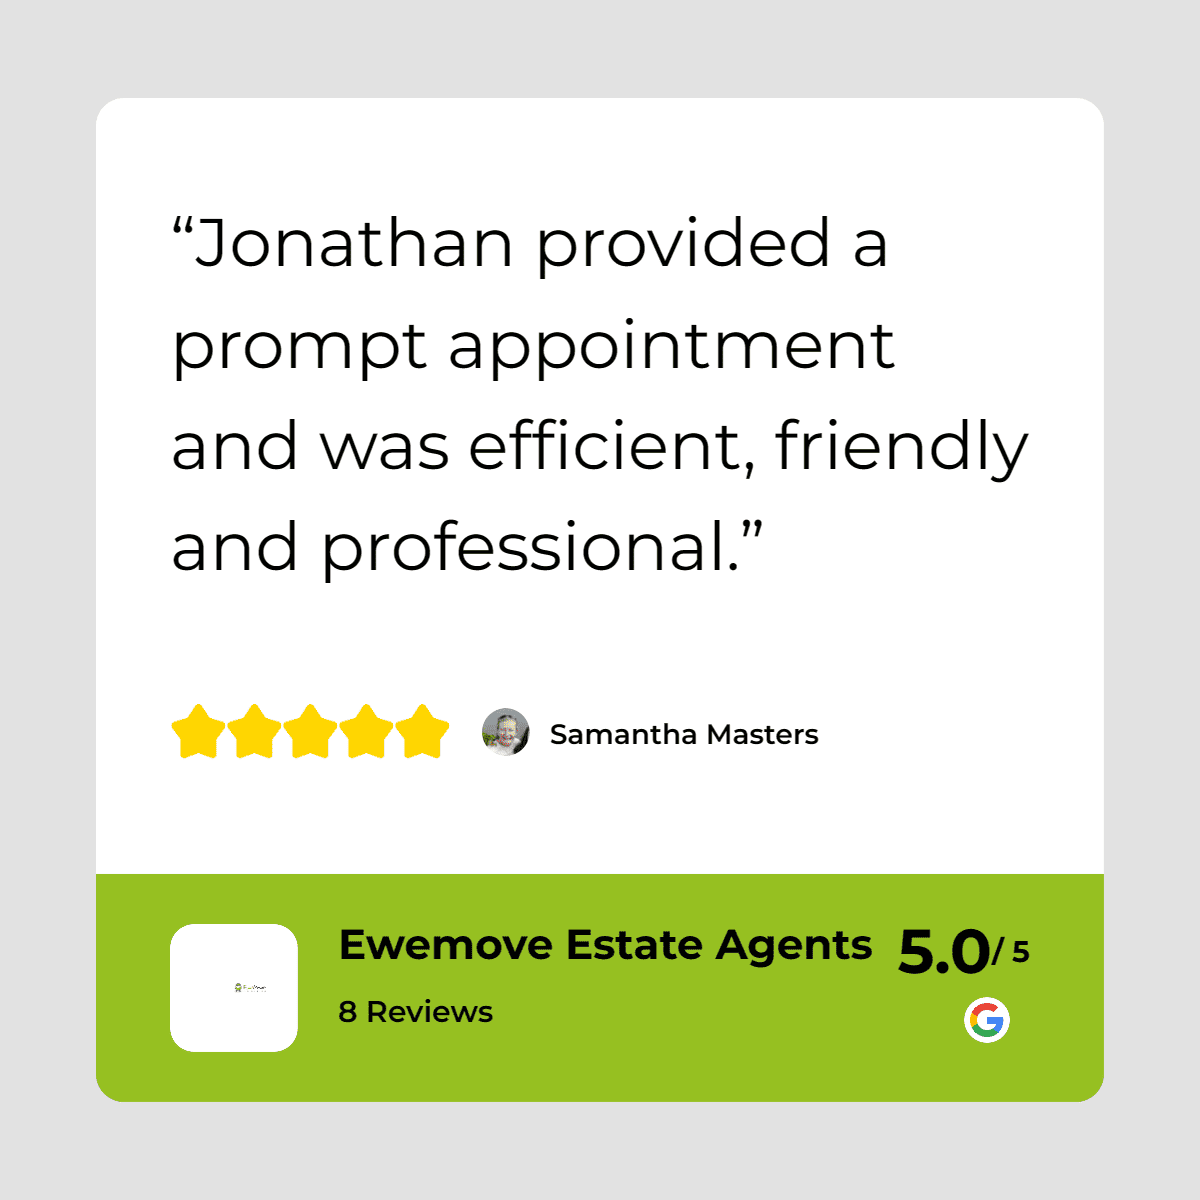 Jonathan provided a prompt appointment and was efficient and professional estate agent.